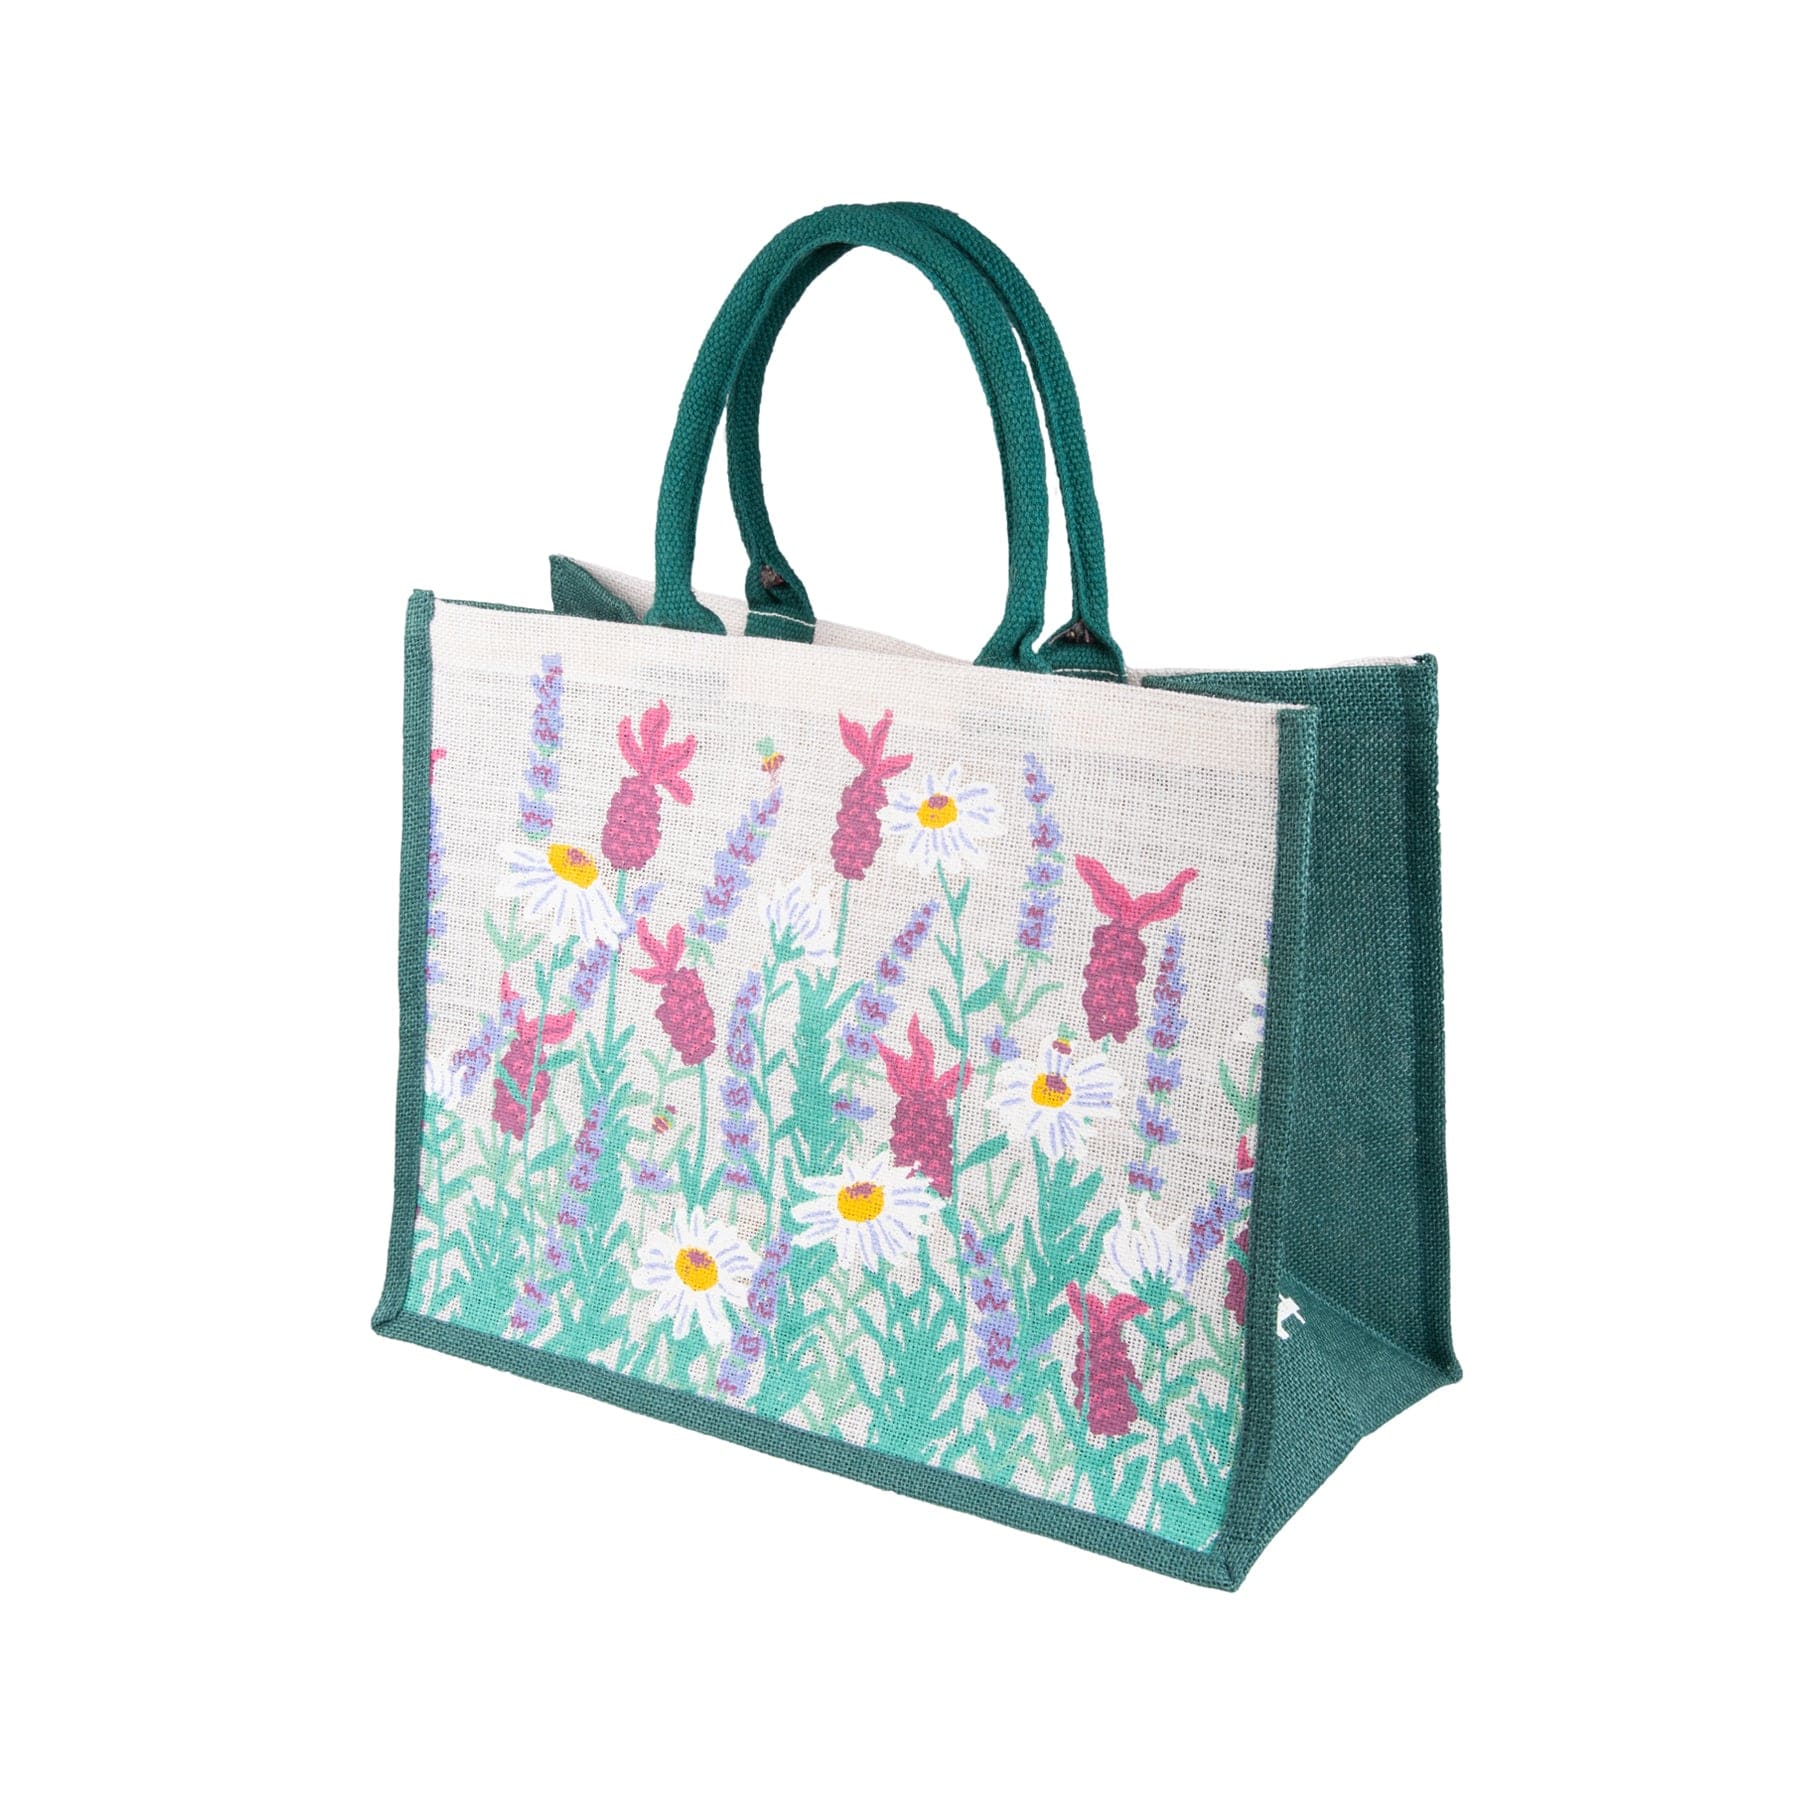 Canvas tote bag with floral and bunny design isolated on white background, reusable eco-friendly shopping bag with green handles